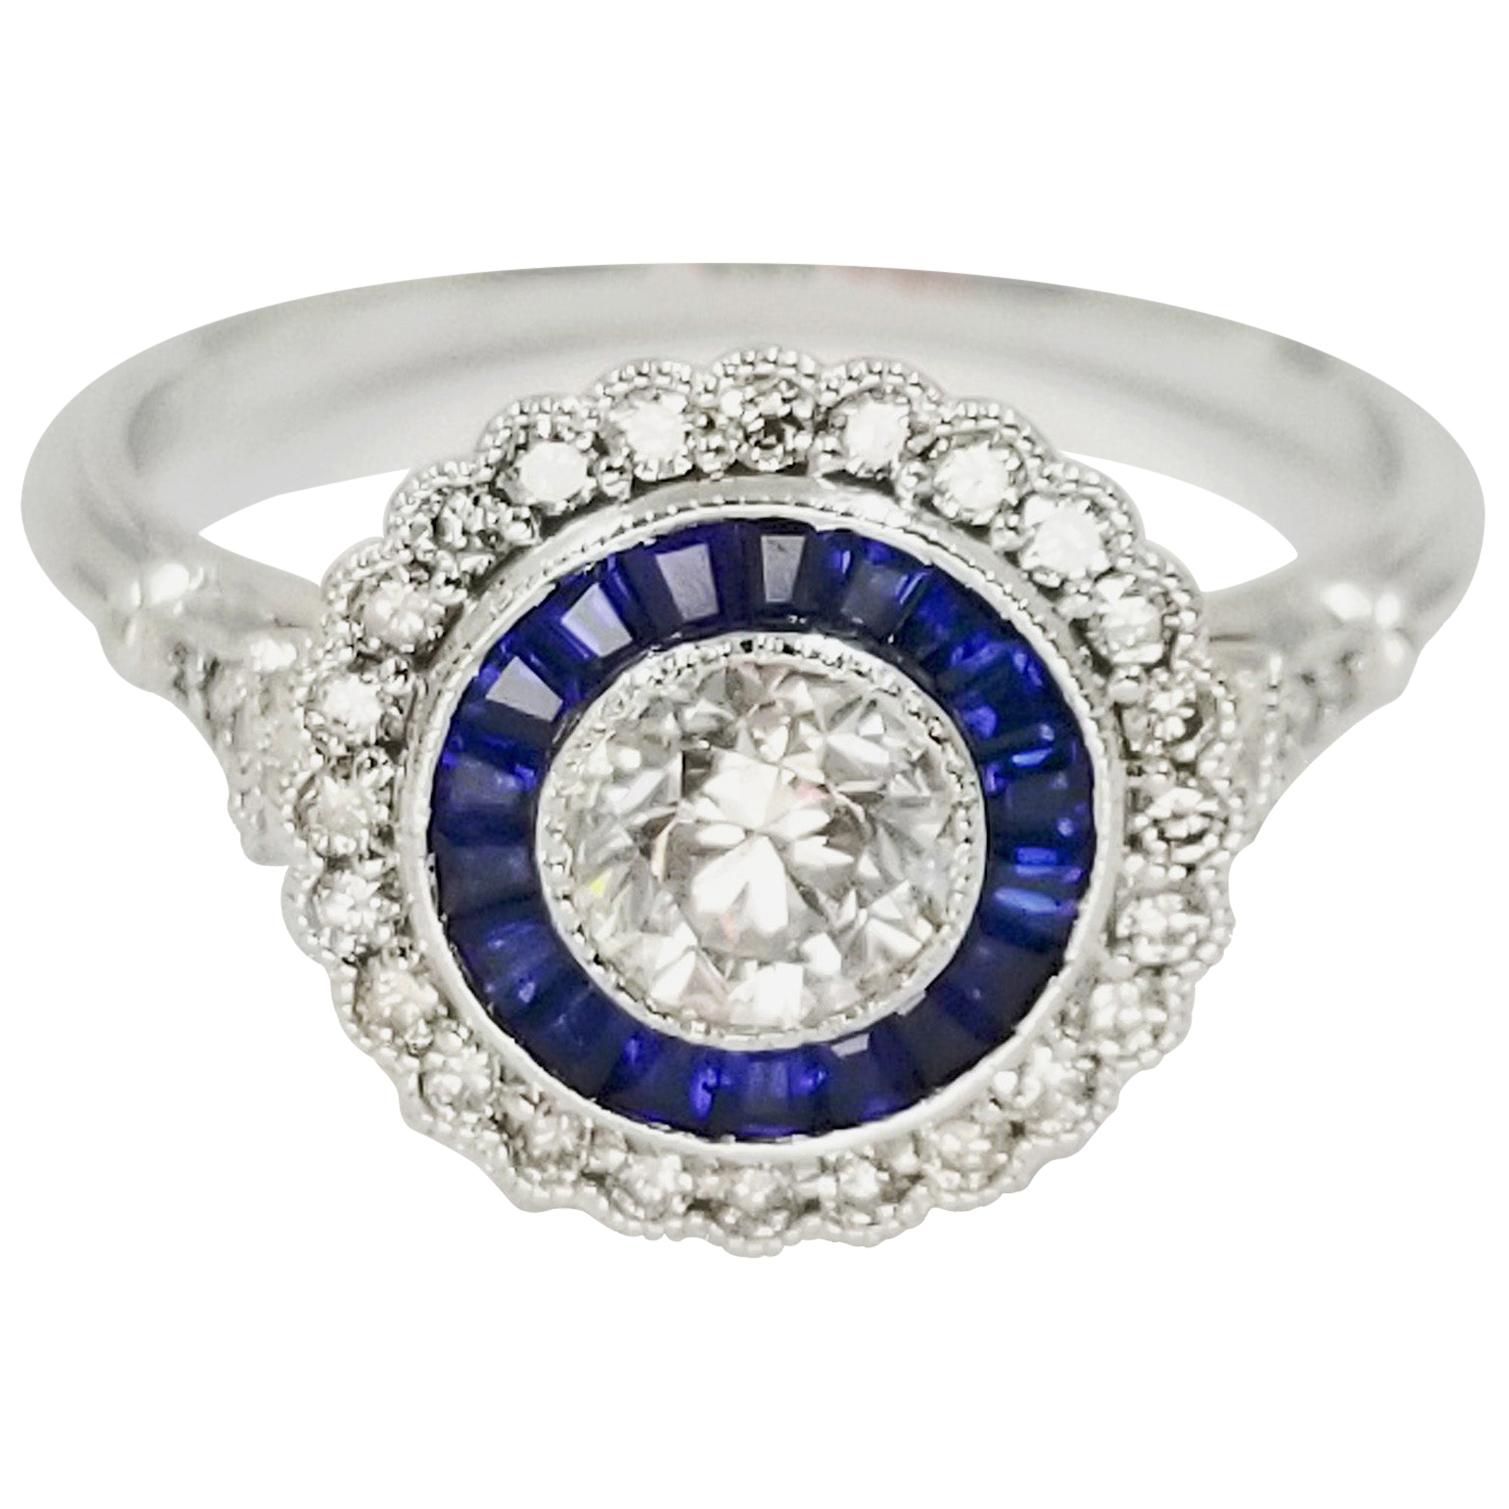 White Gold Diamond and Sapphire Halo Ring